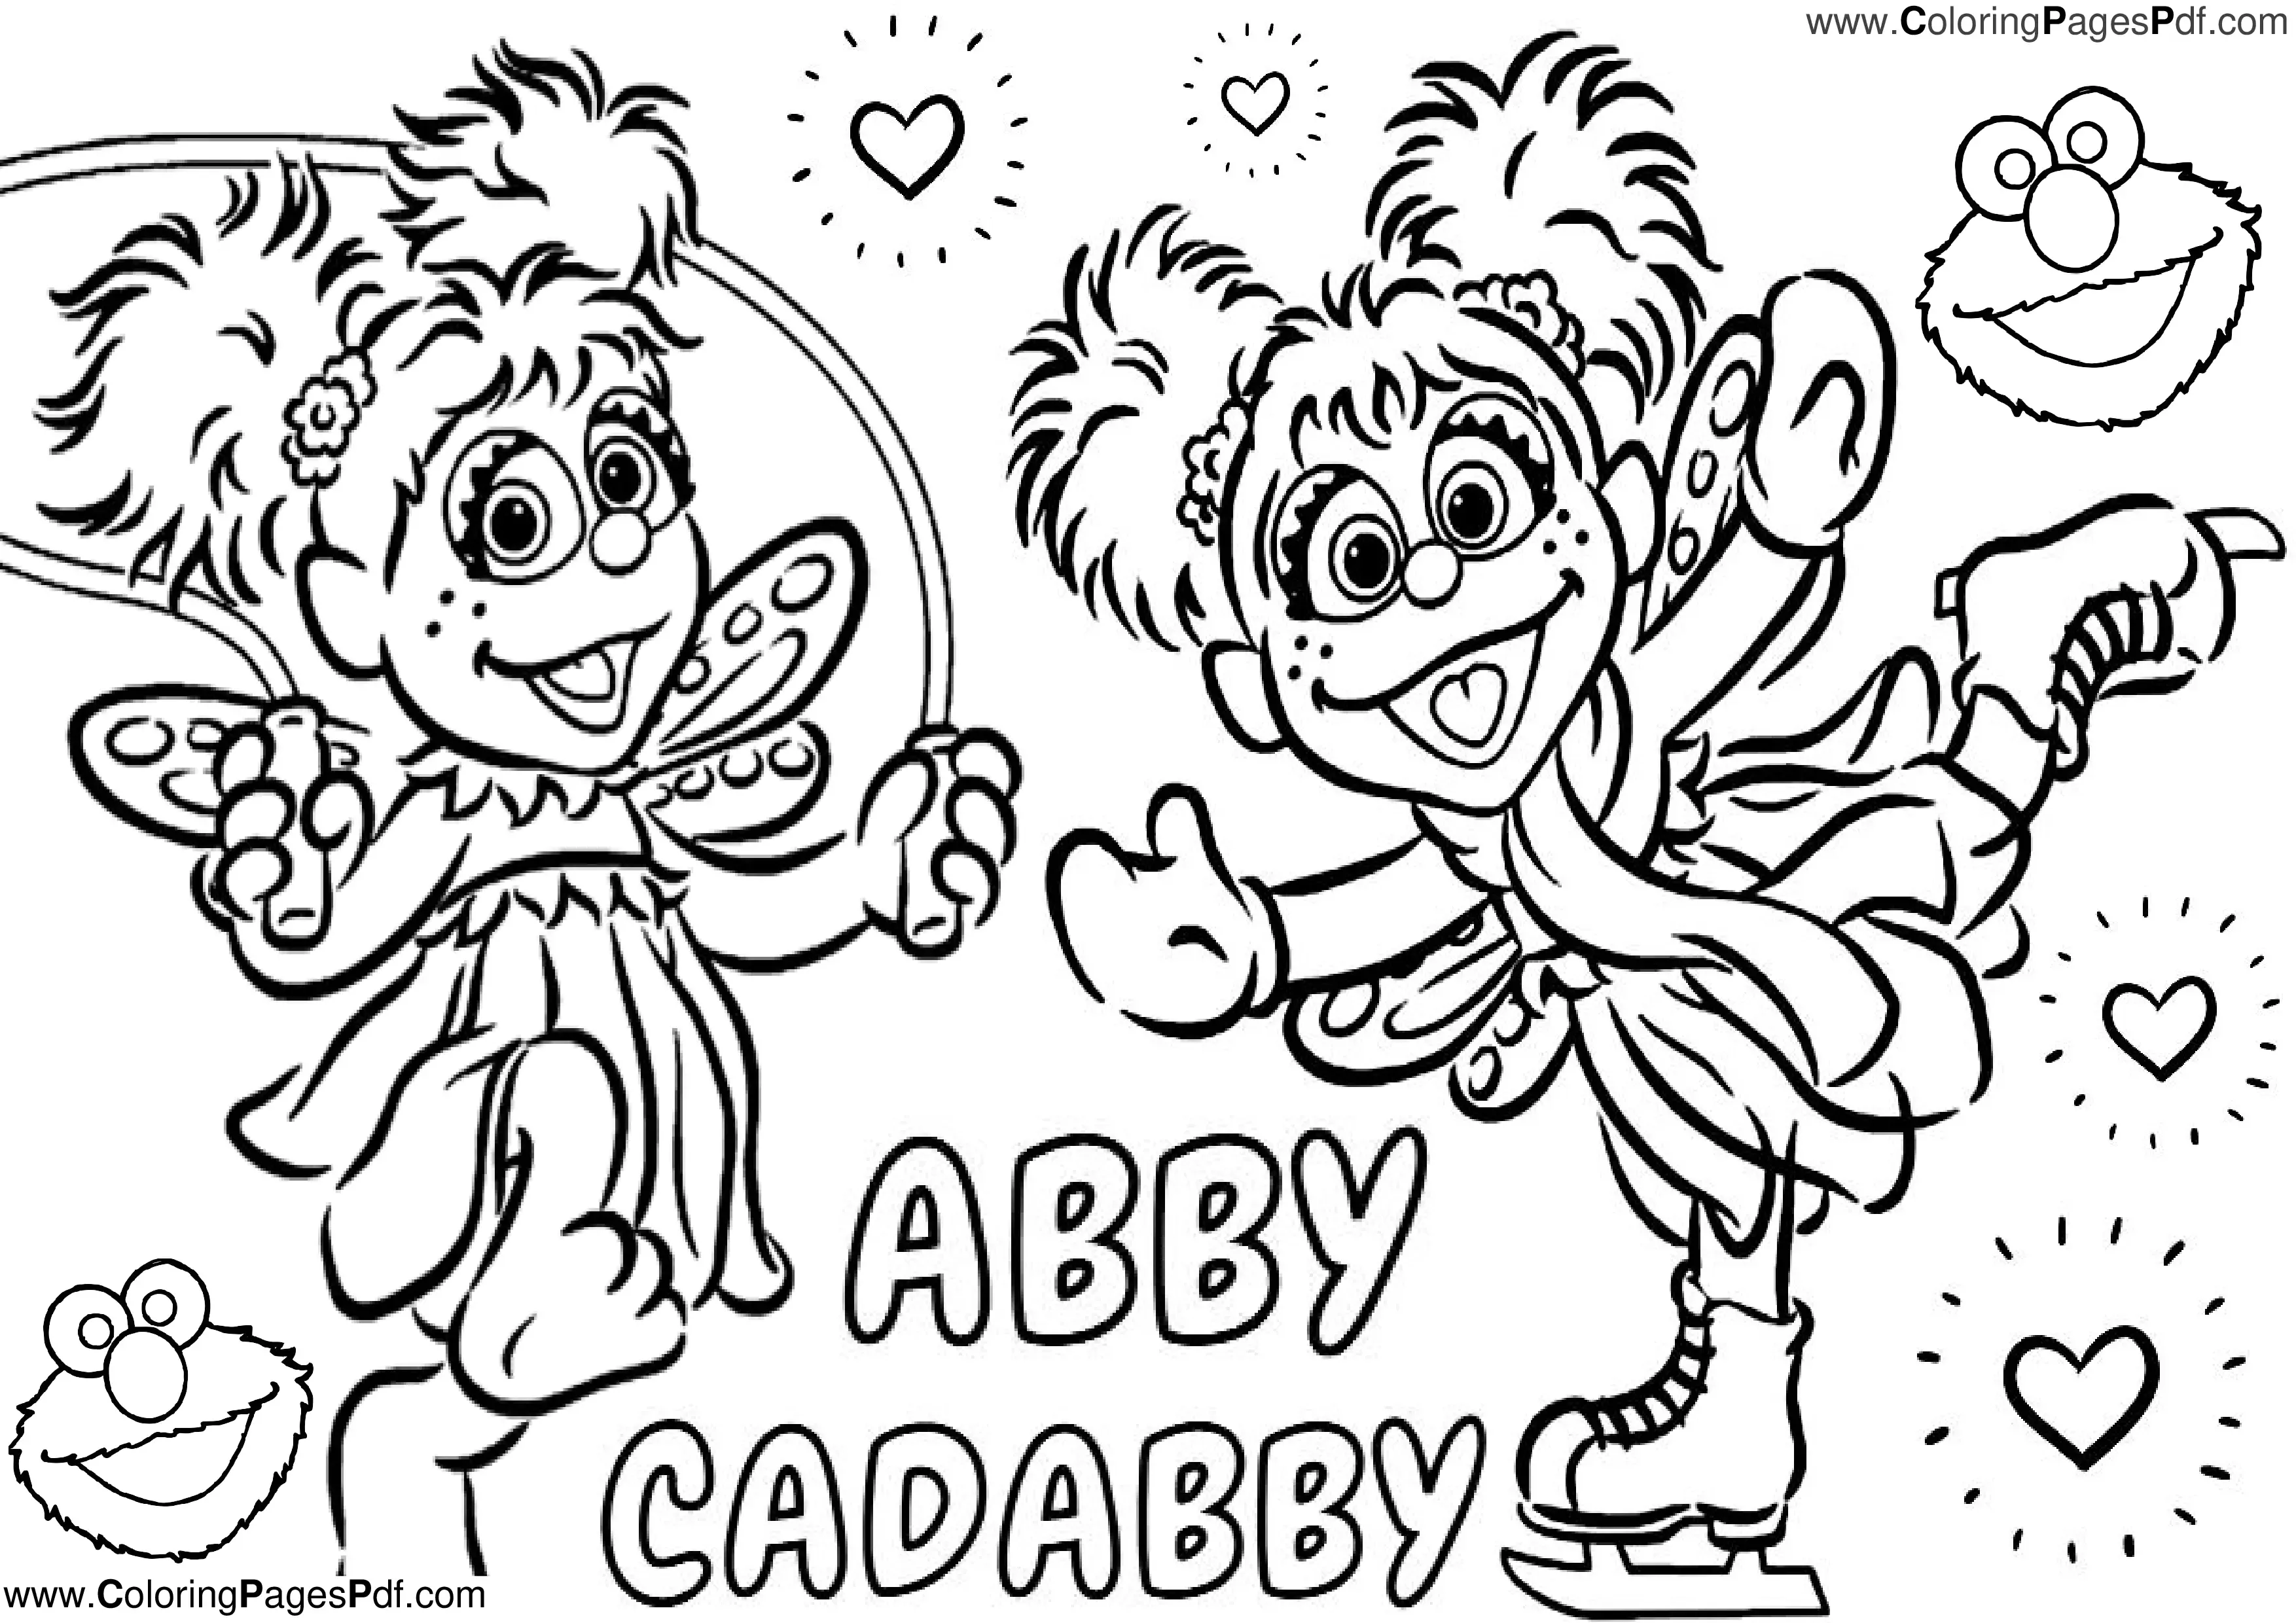 Abby Cadabby coloring page